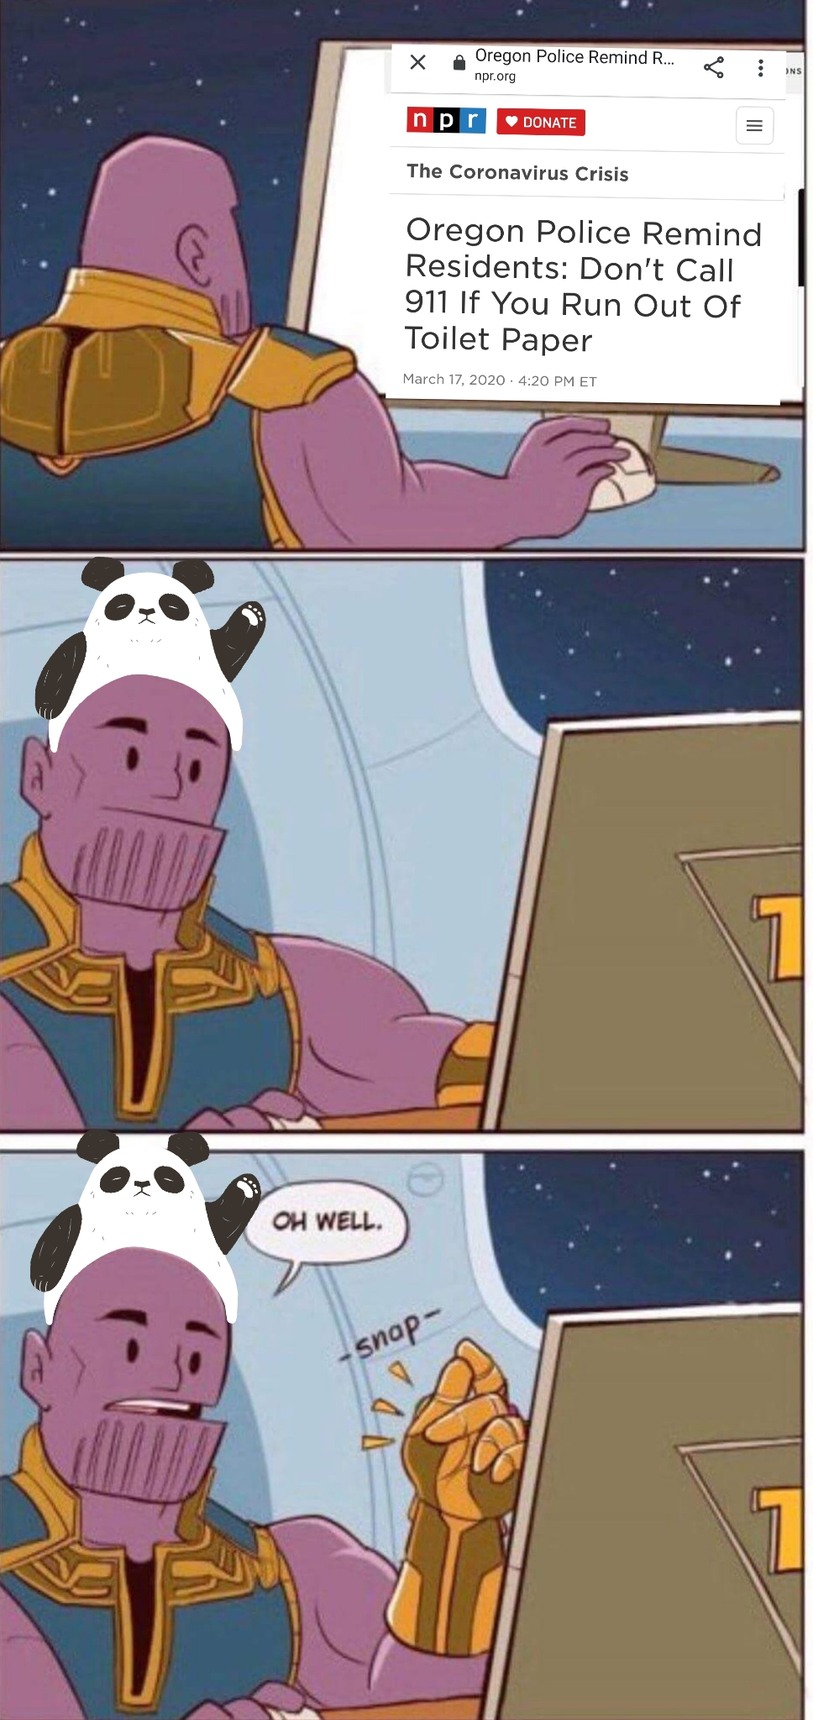 Thanos will get rid of humanity - meme